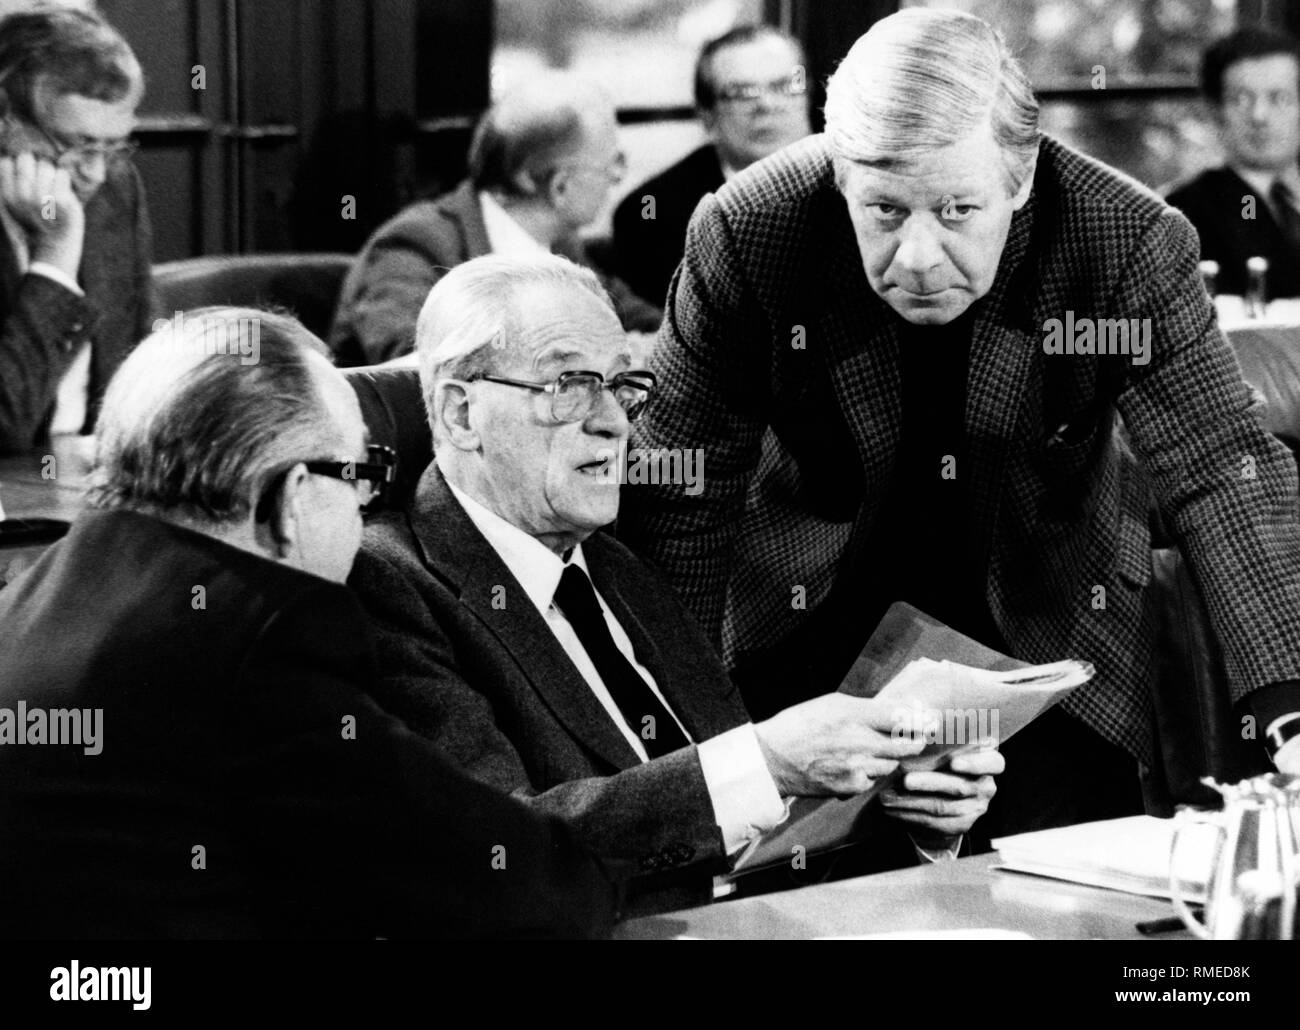 The group leader of the SPD Herbert Wehner (center) talking with Chancellor Helmut Schmidt (right) and the deputy party chairman Hans-Juergen Wischnewski (left) in the Bundestag. In the background are further deputies. Stock Photo